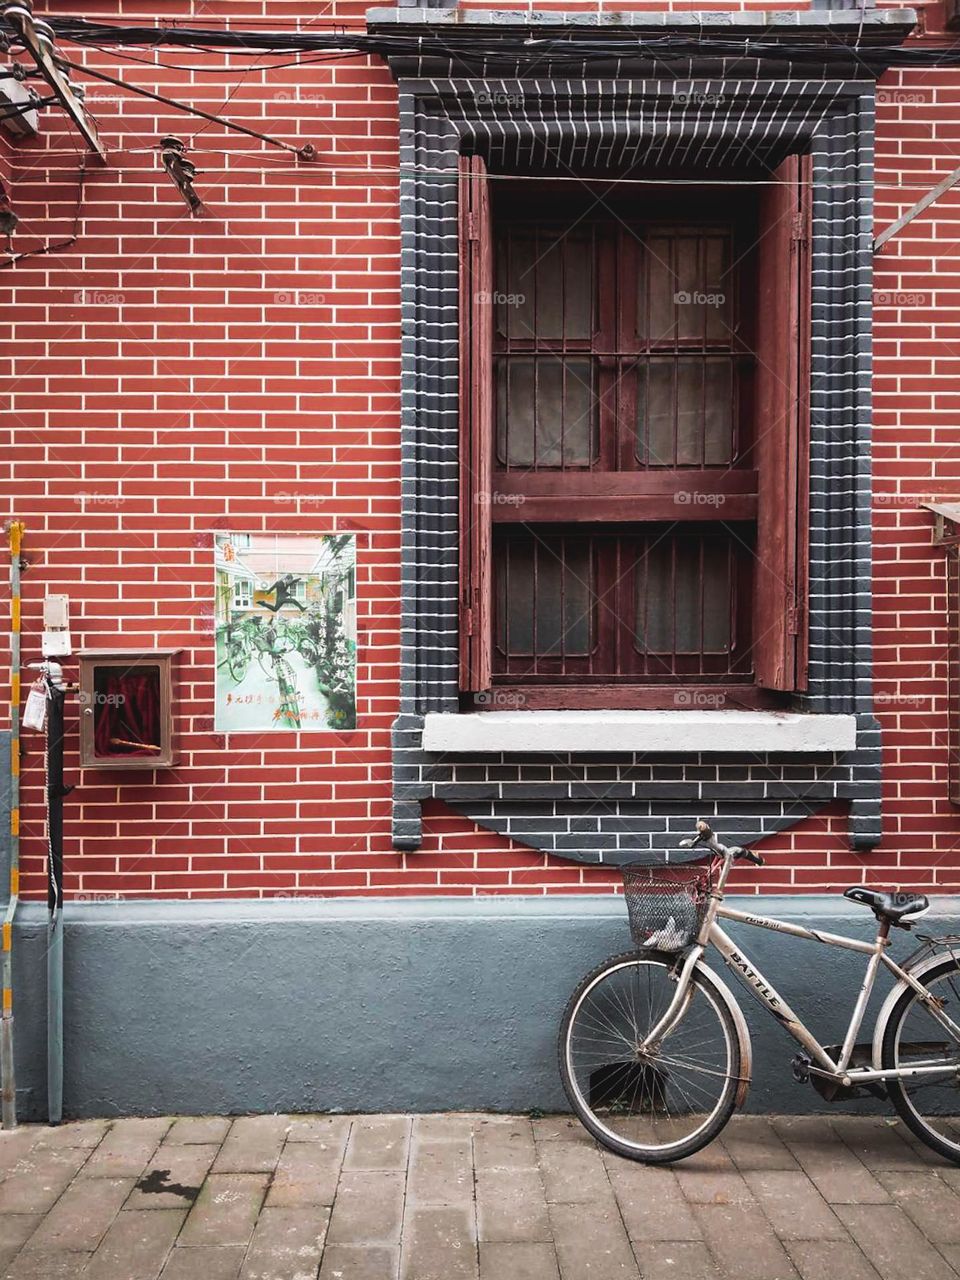 A beige rustic bicycle by a colorful red brick wall